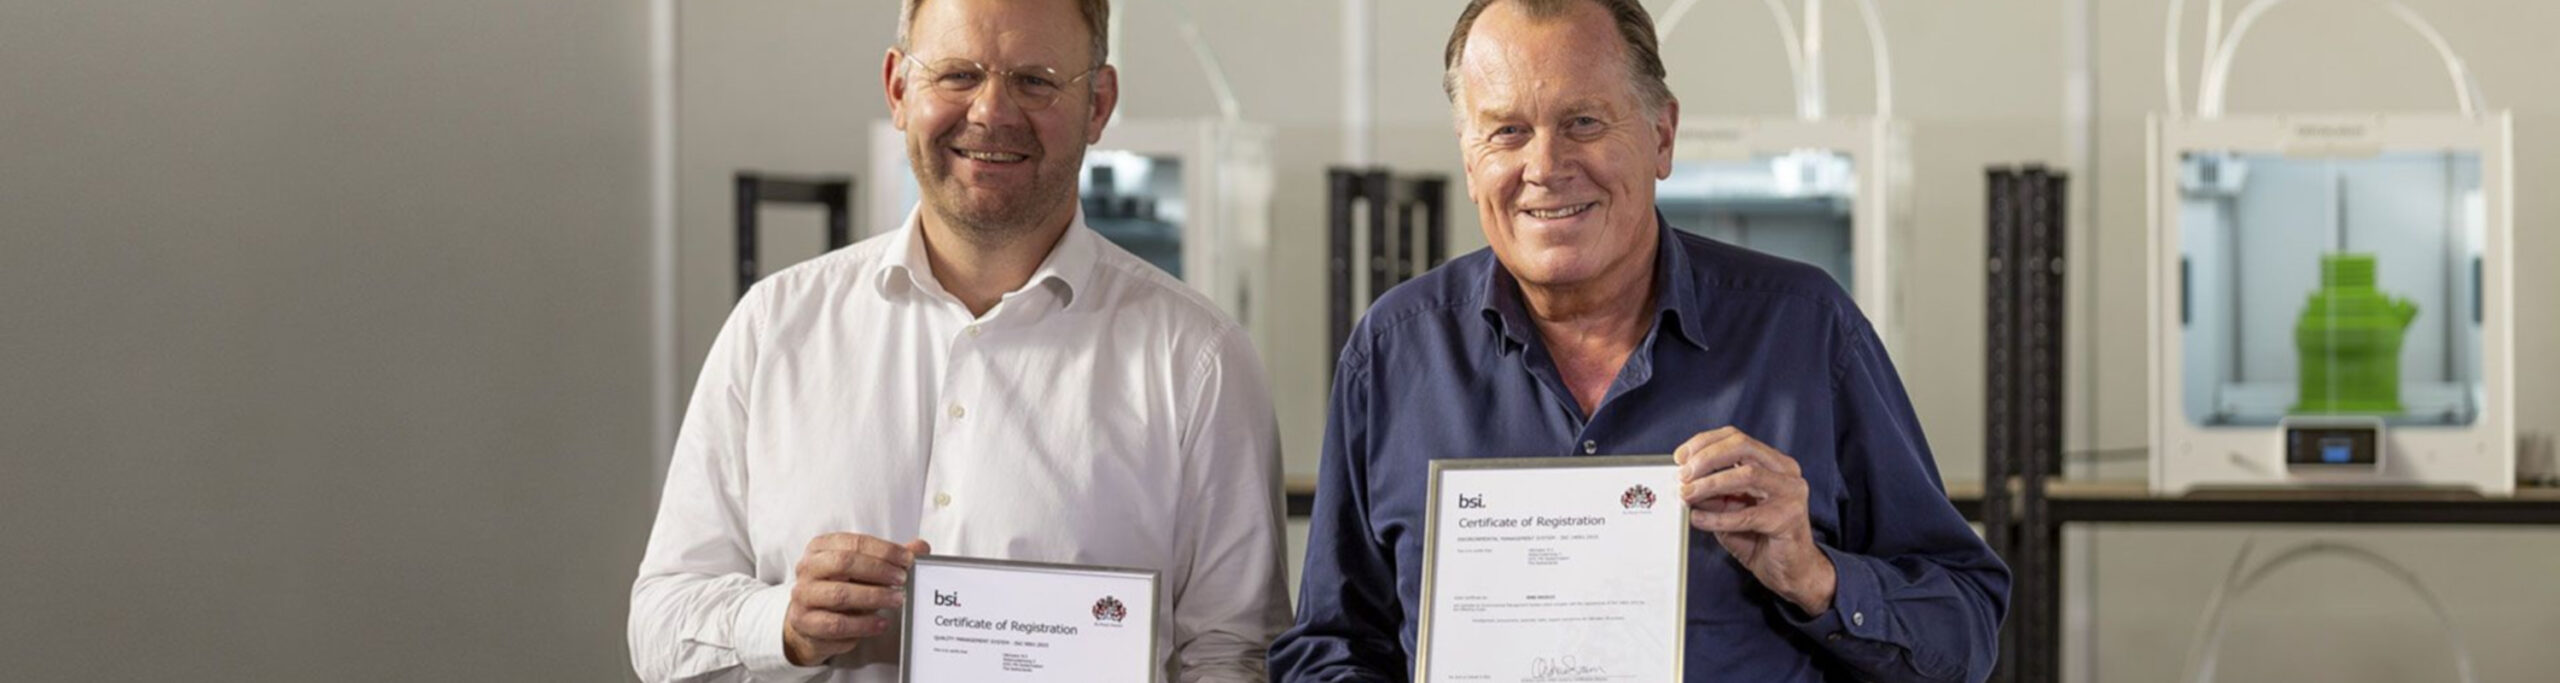 Ultimaker achieves ISO 9001 and ISO 14001